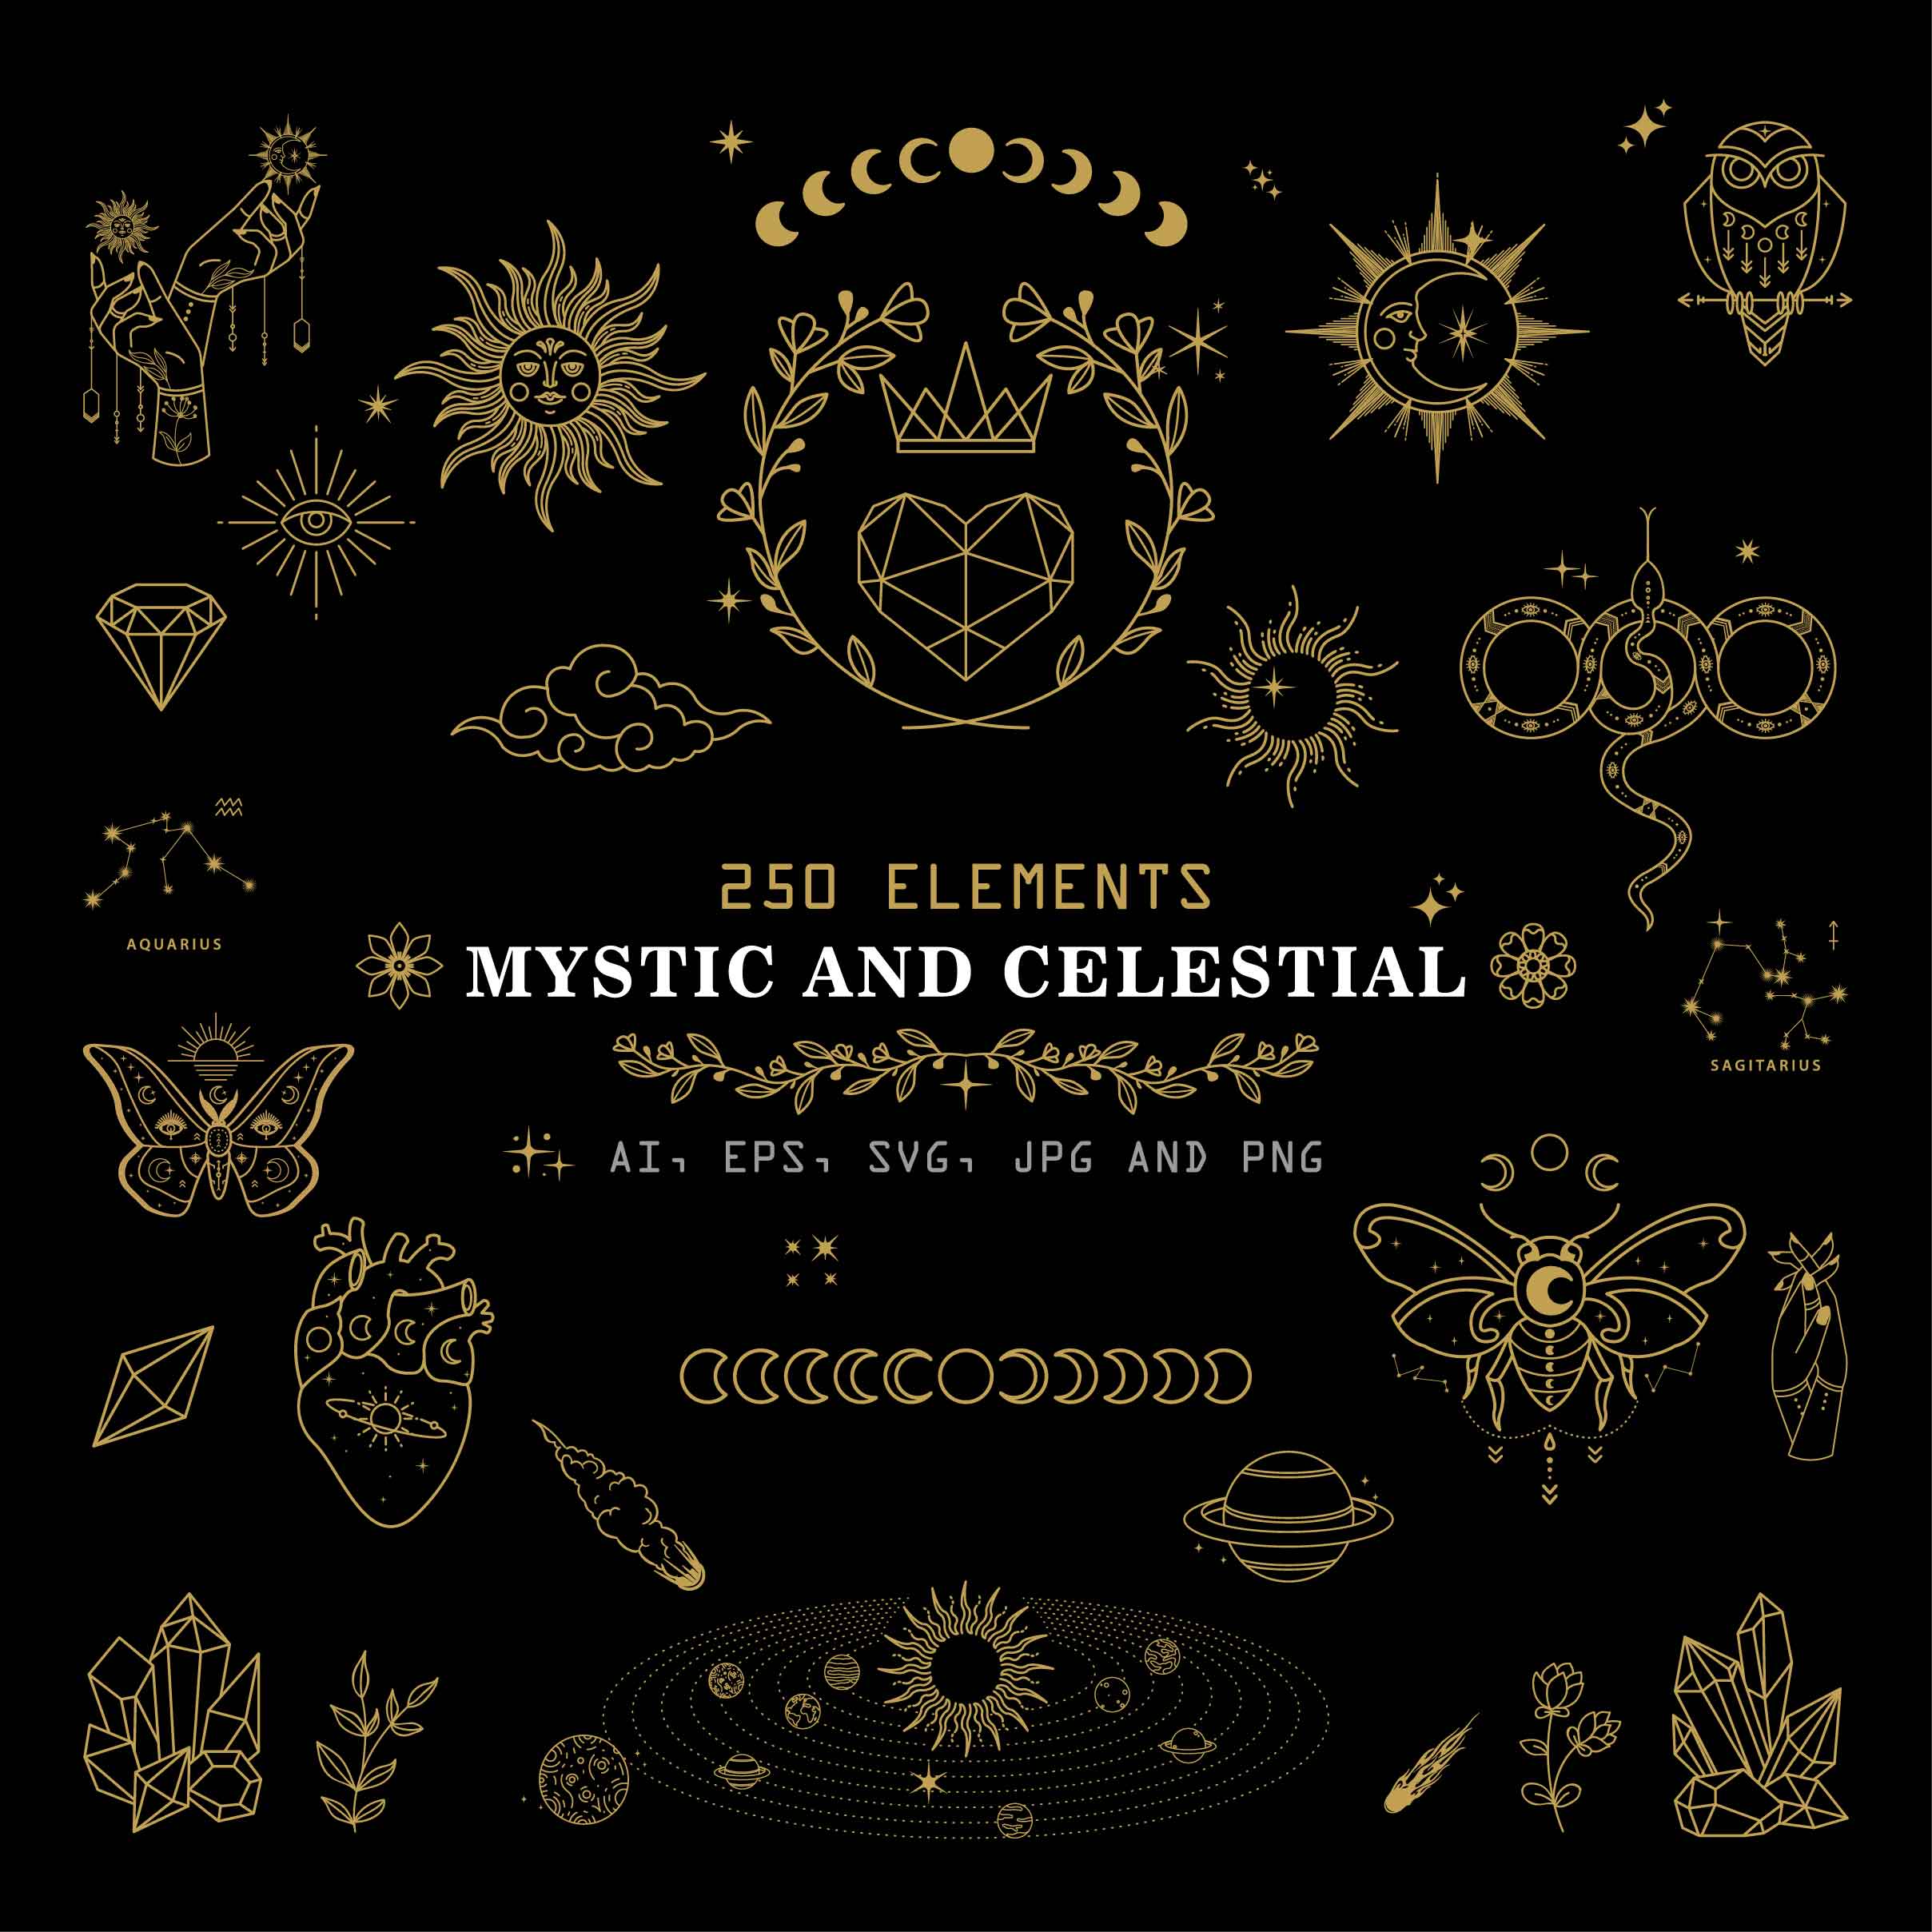 Mystical and Celestial Elements Illustration cover image.